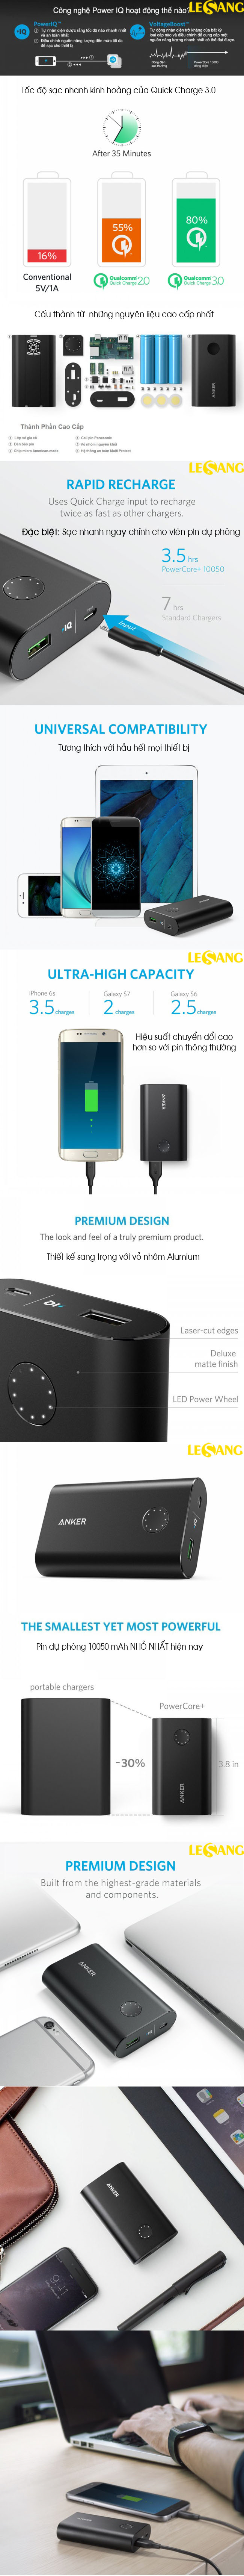 Pin dự phòng 10050 mAh Anker PowerCore Plus + Quick Charge 3.0 (USA) 2365